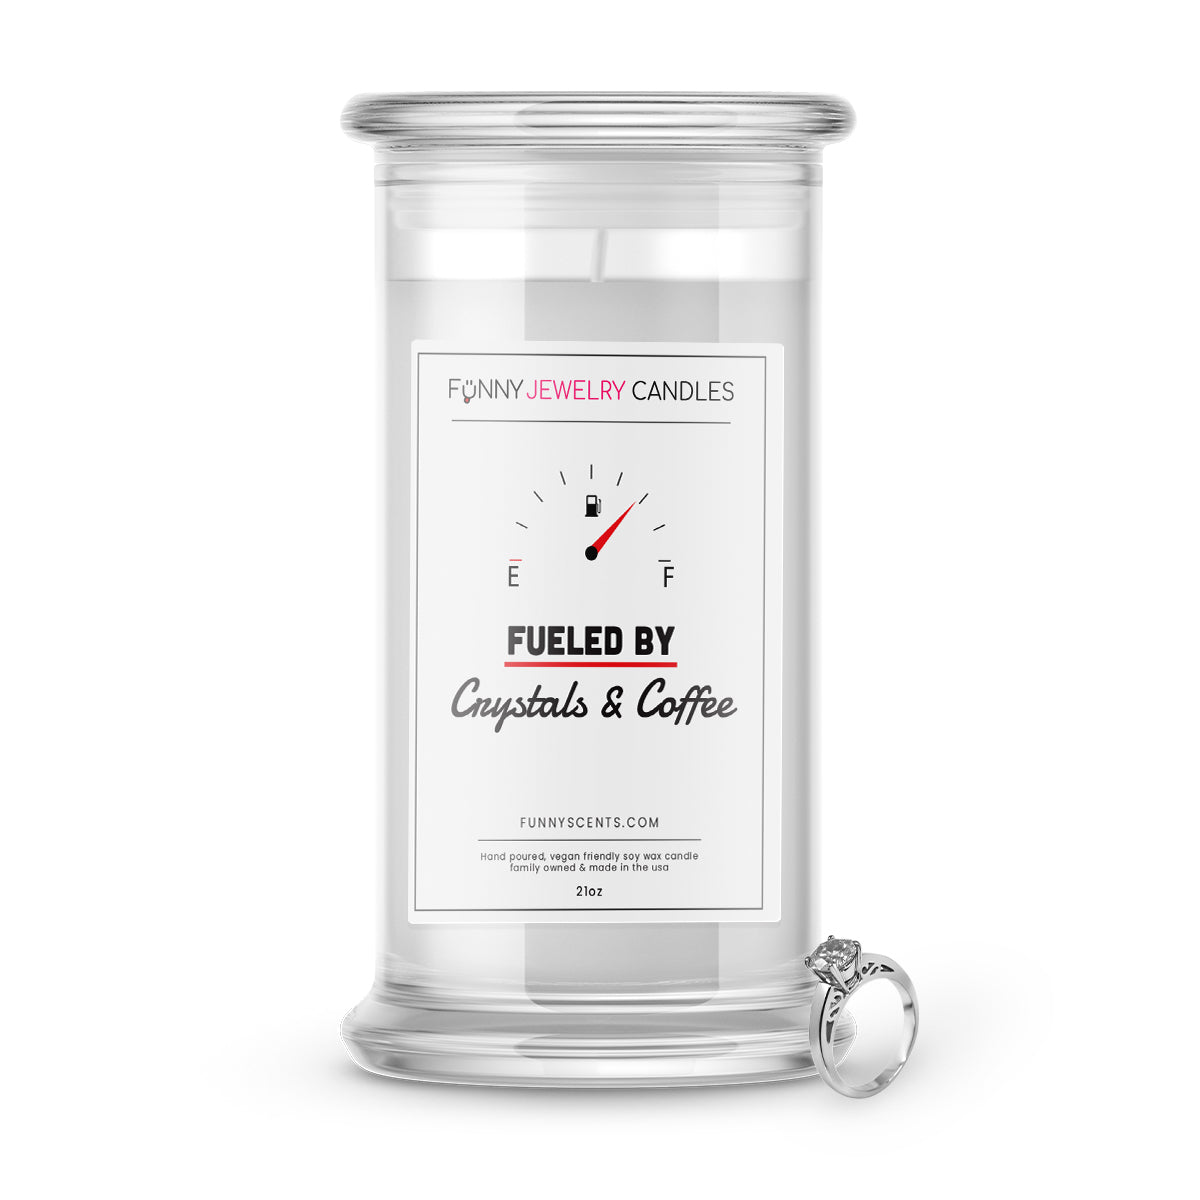 Fueled By Crystals and Coffee Jewelry Funny Candles